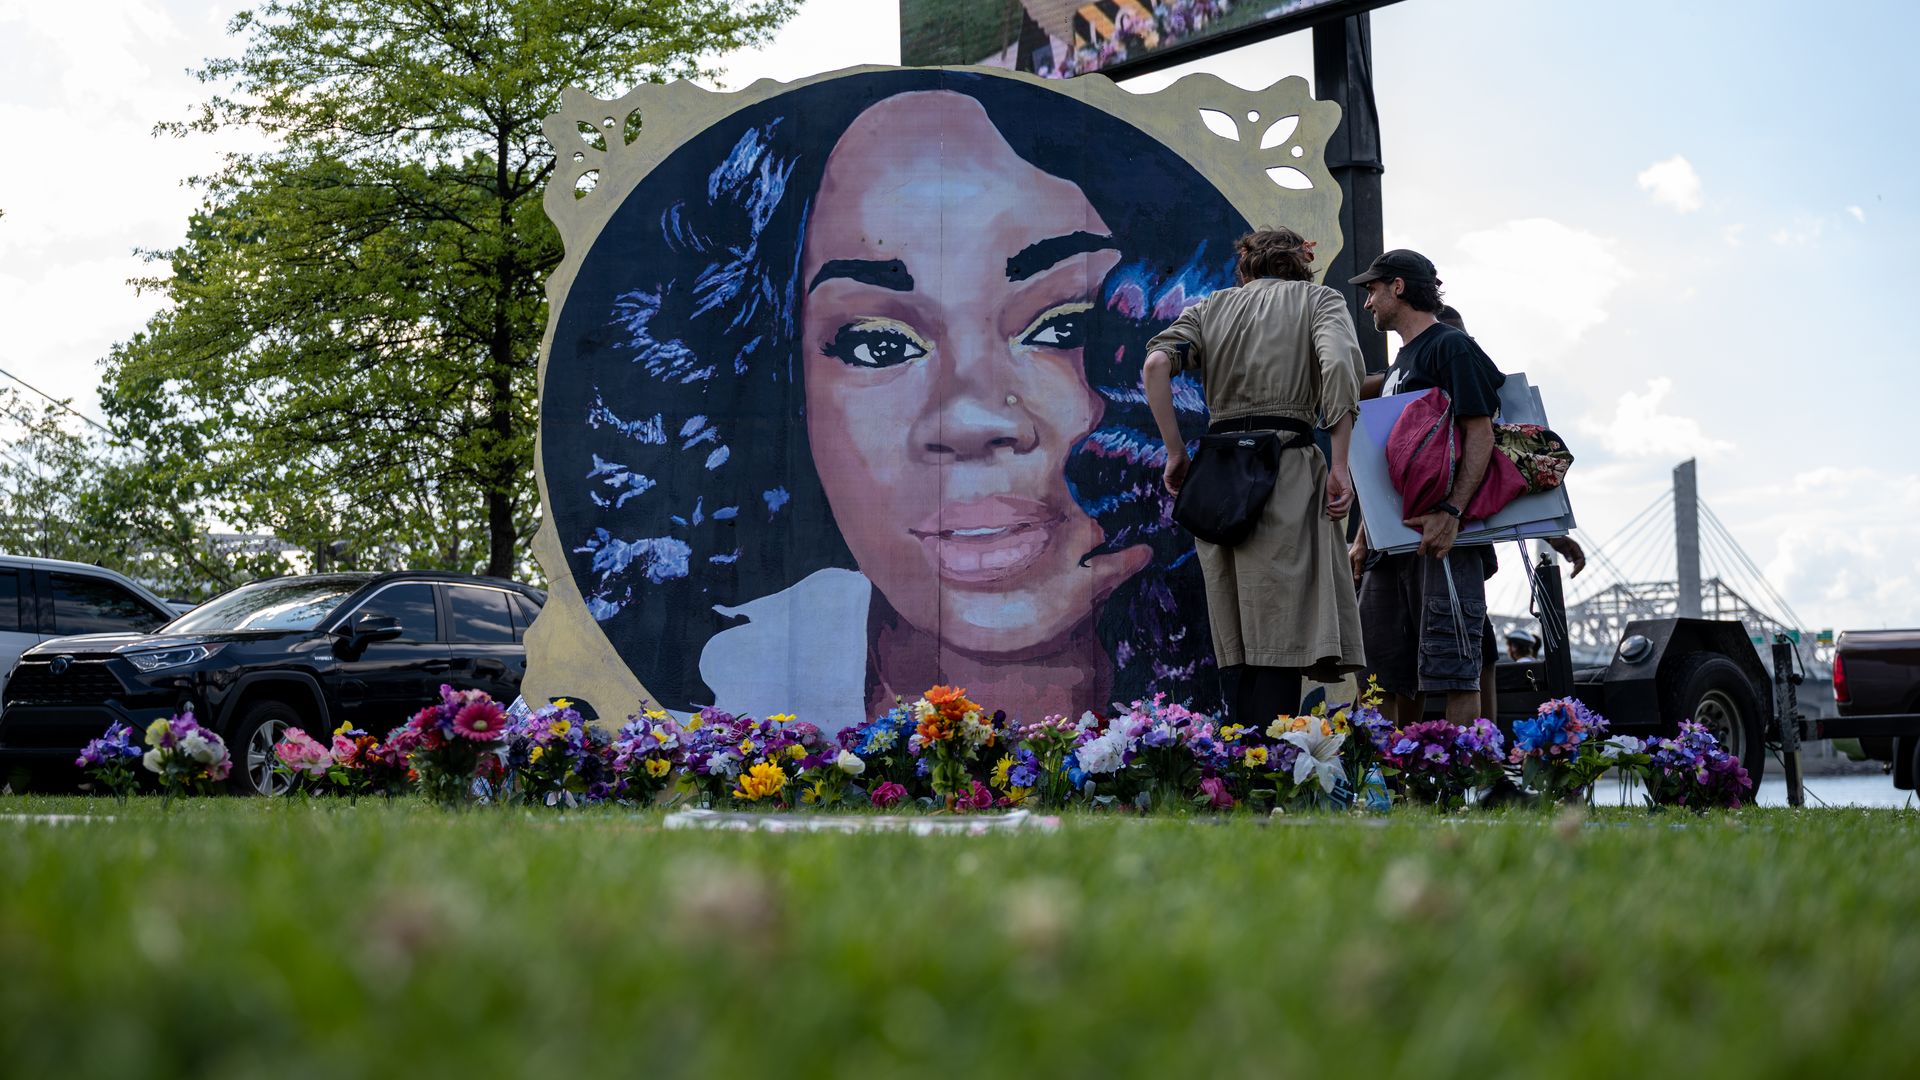 Protesters and volunteers prepare a Breonna Taylor art installation by laying posters and flowers before the "Praise in the Park" event at the Big Four Lawn on June 5, 2021 in Louisville, Kentucky.